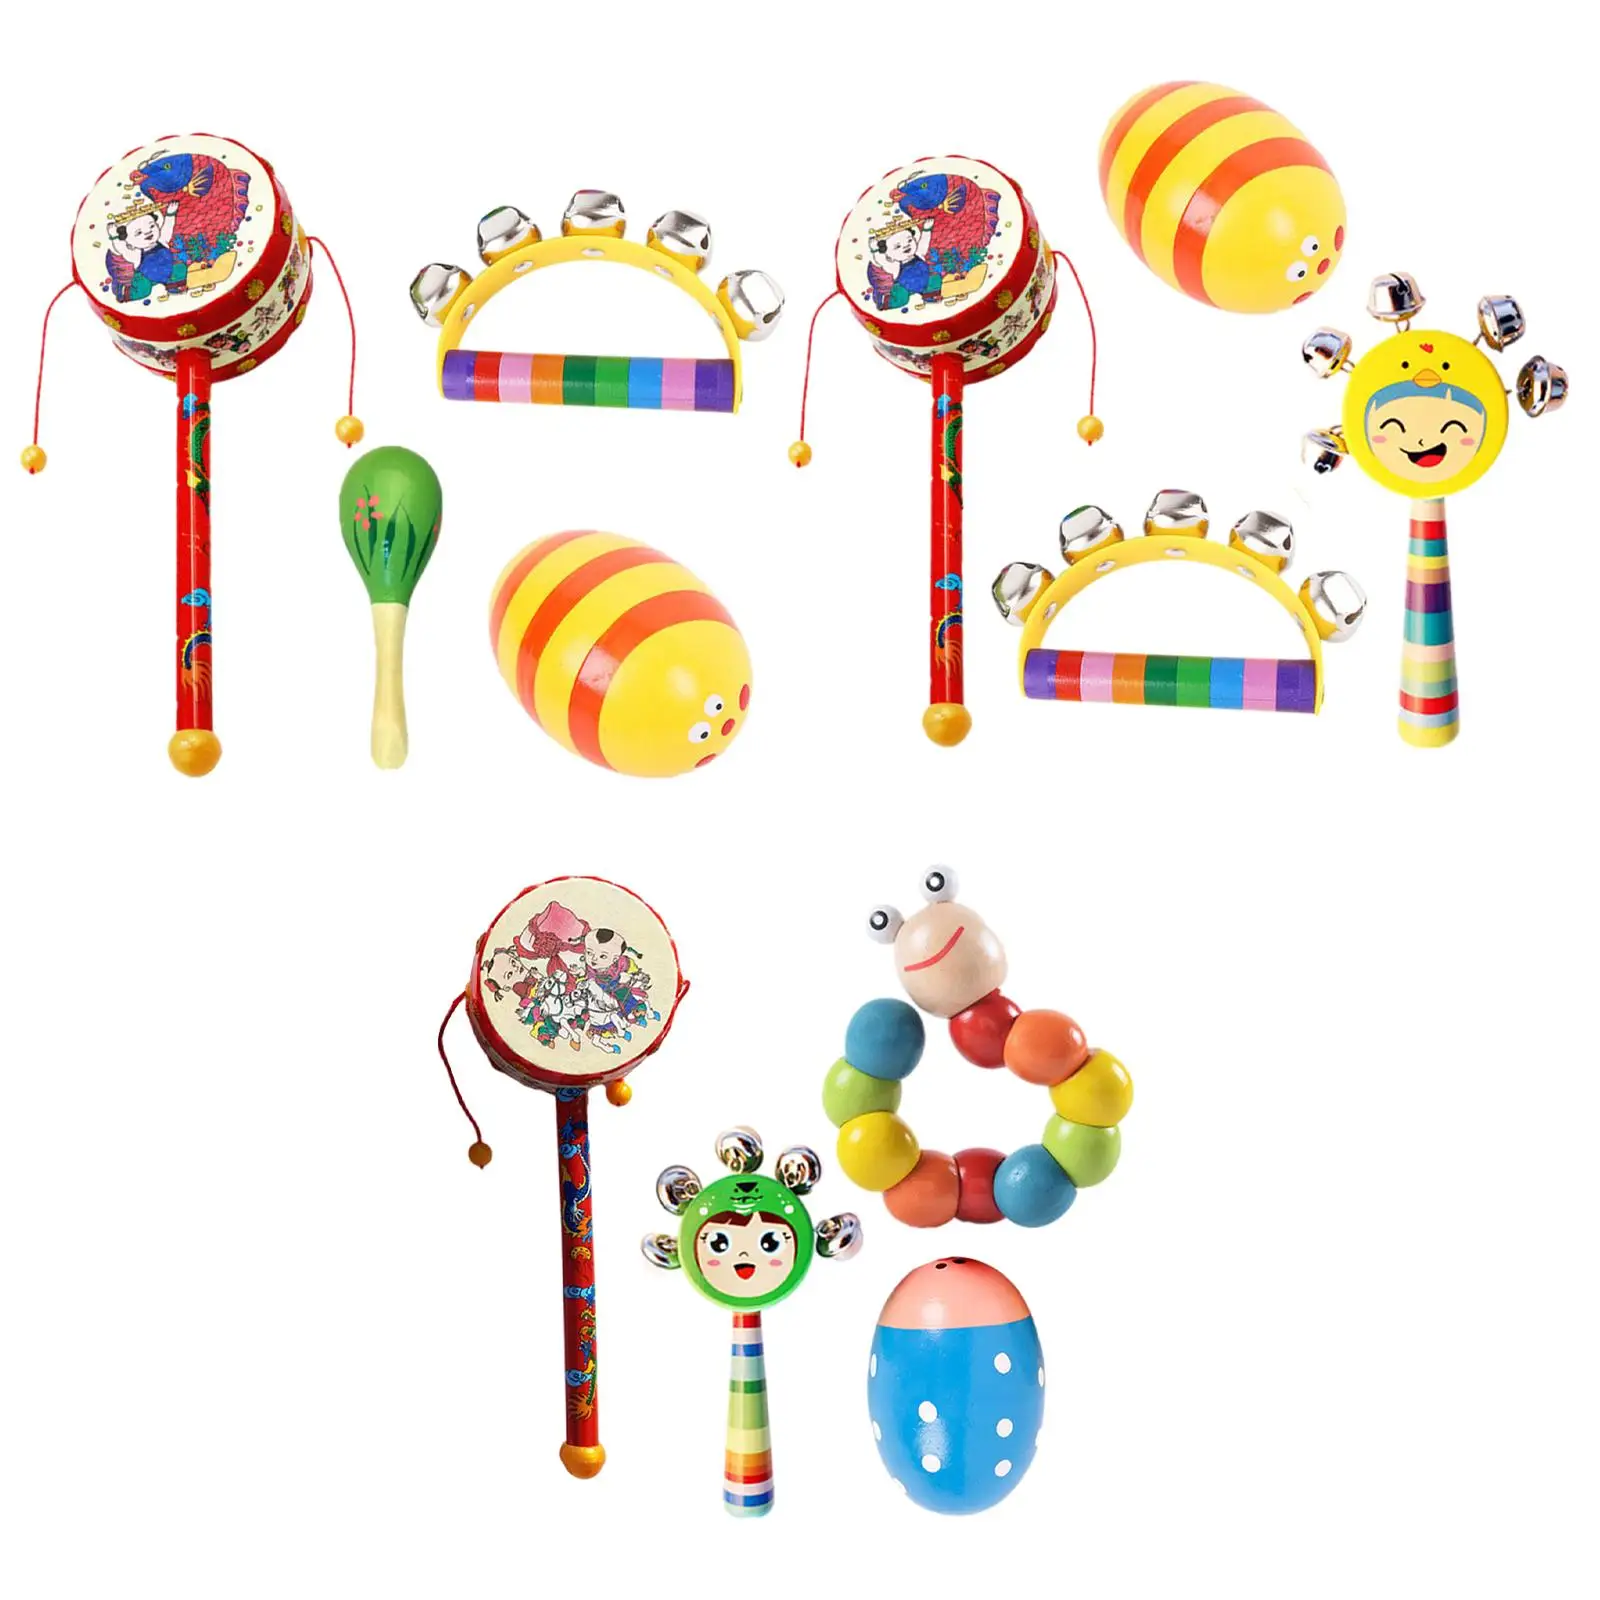 

4 Pieces Wooden Percussion Musical Instrument Playset Premium Percussion Rhythm Kits for Children Newborn Baby 3-6 Months Party